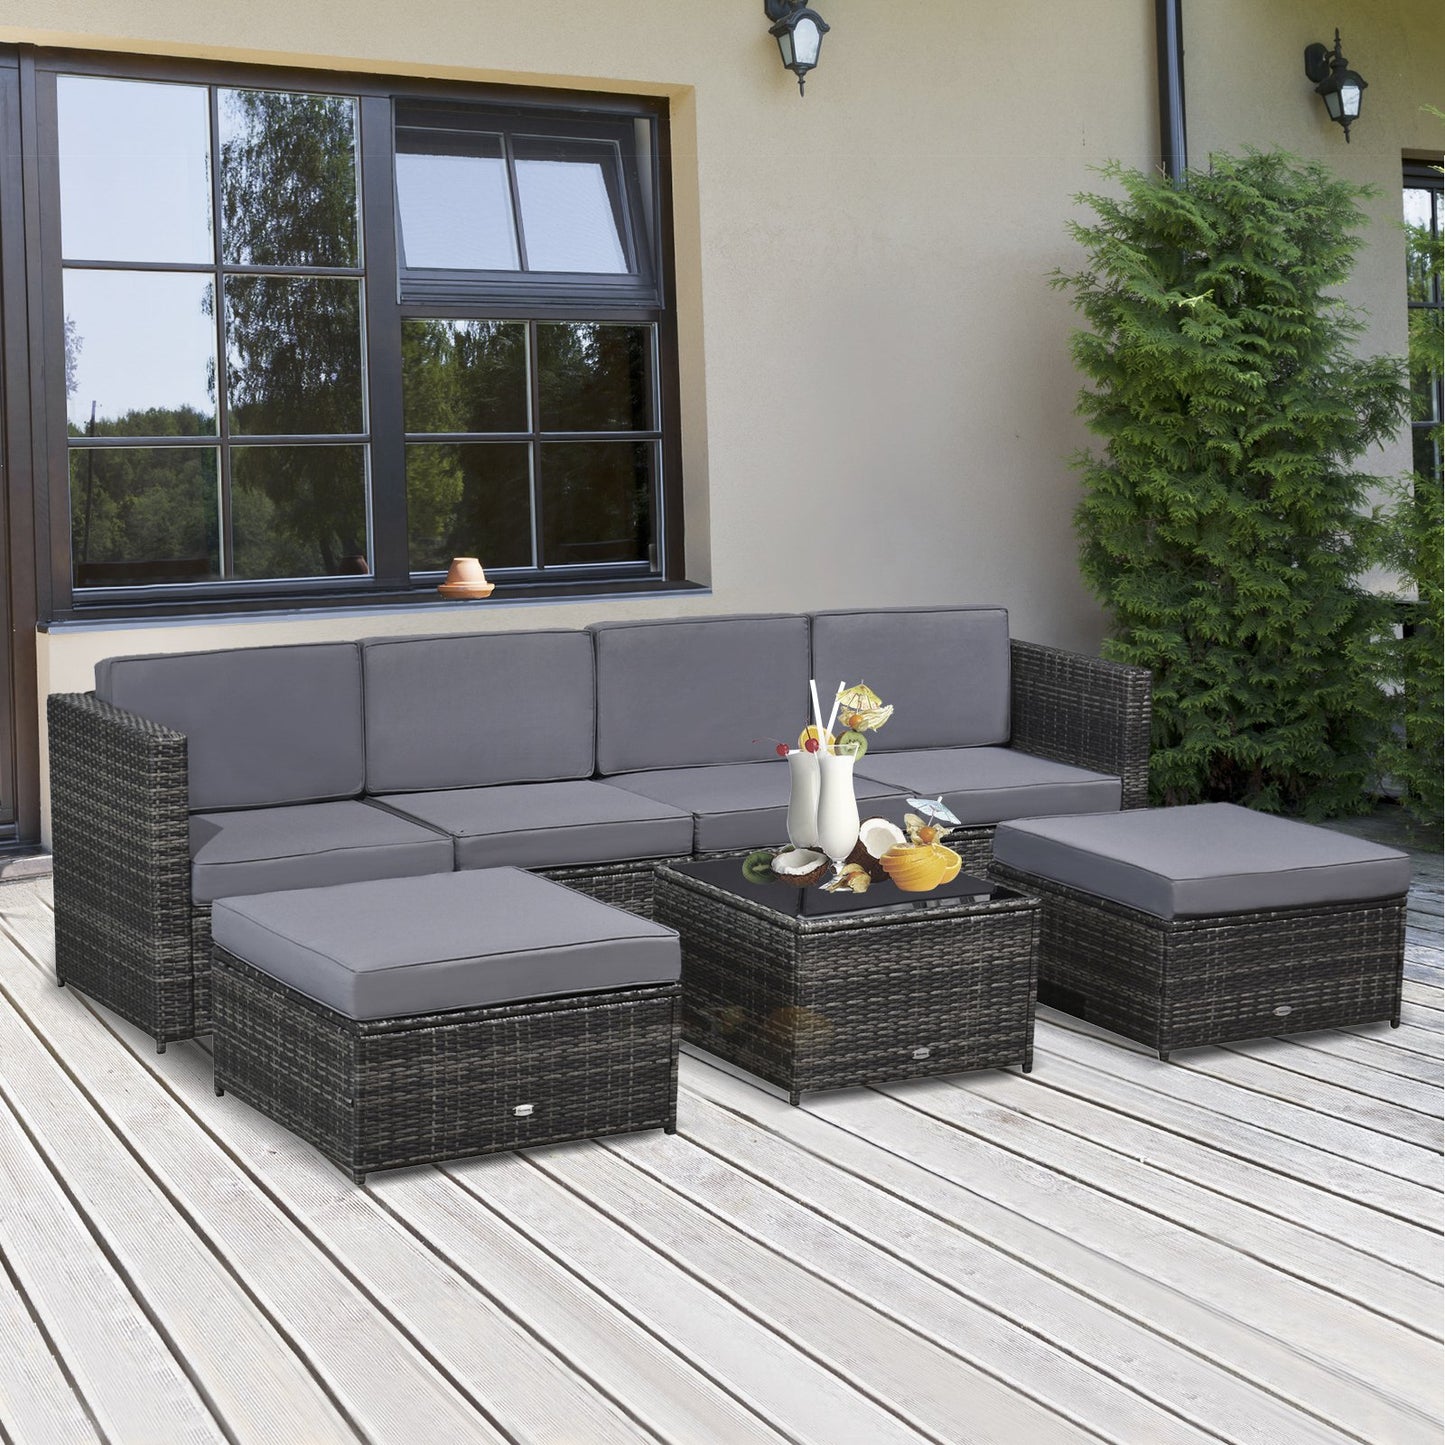 Outsunny 7Pc Rattan Wicker Sofa Set Patio Furniture Garden Outdoor with Cushions and Tables